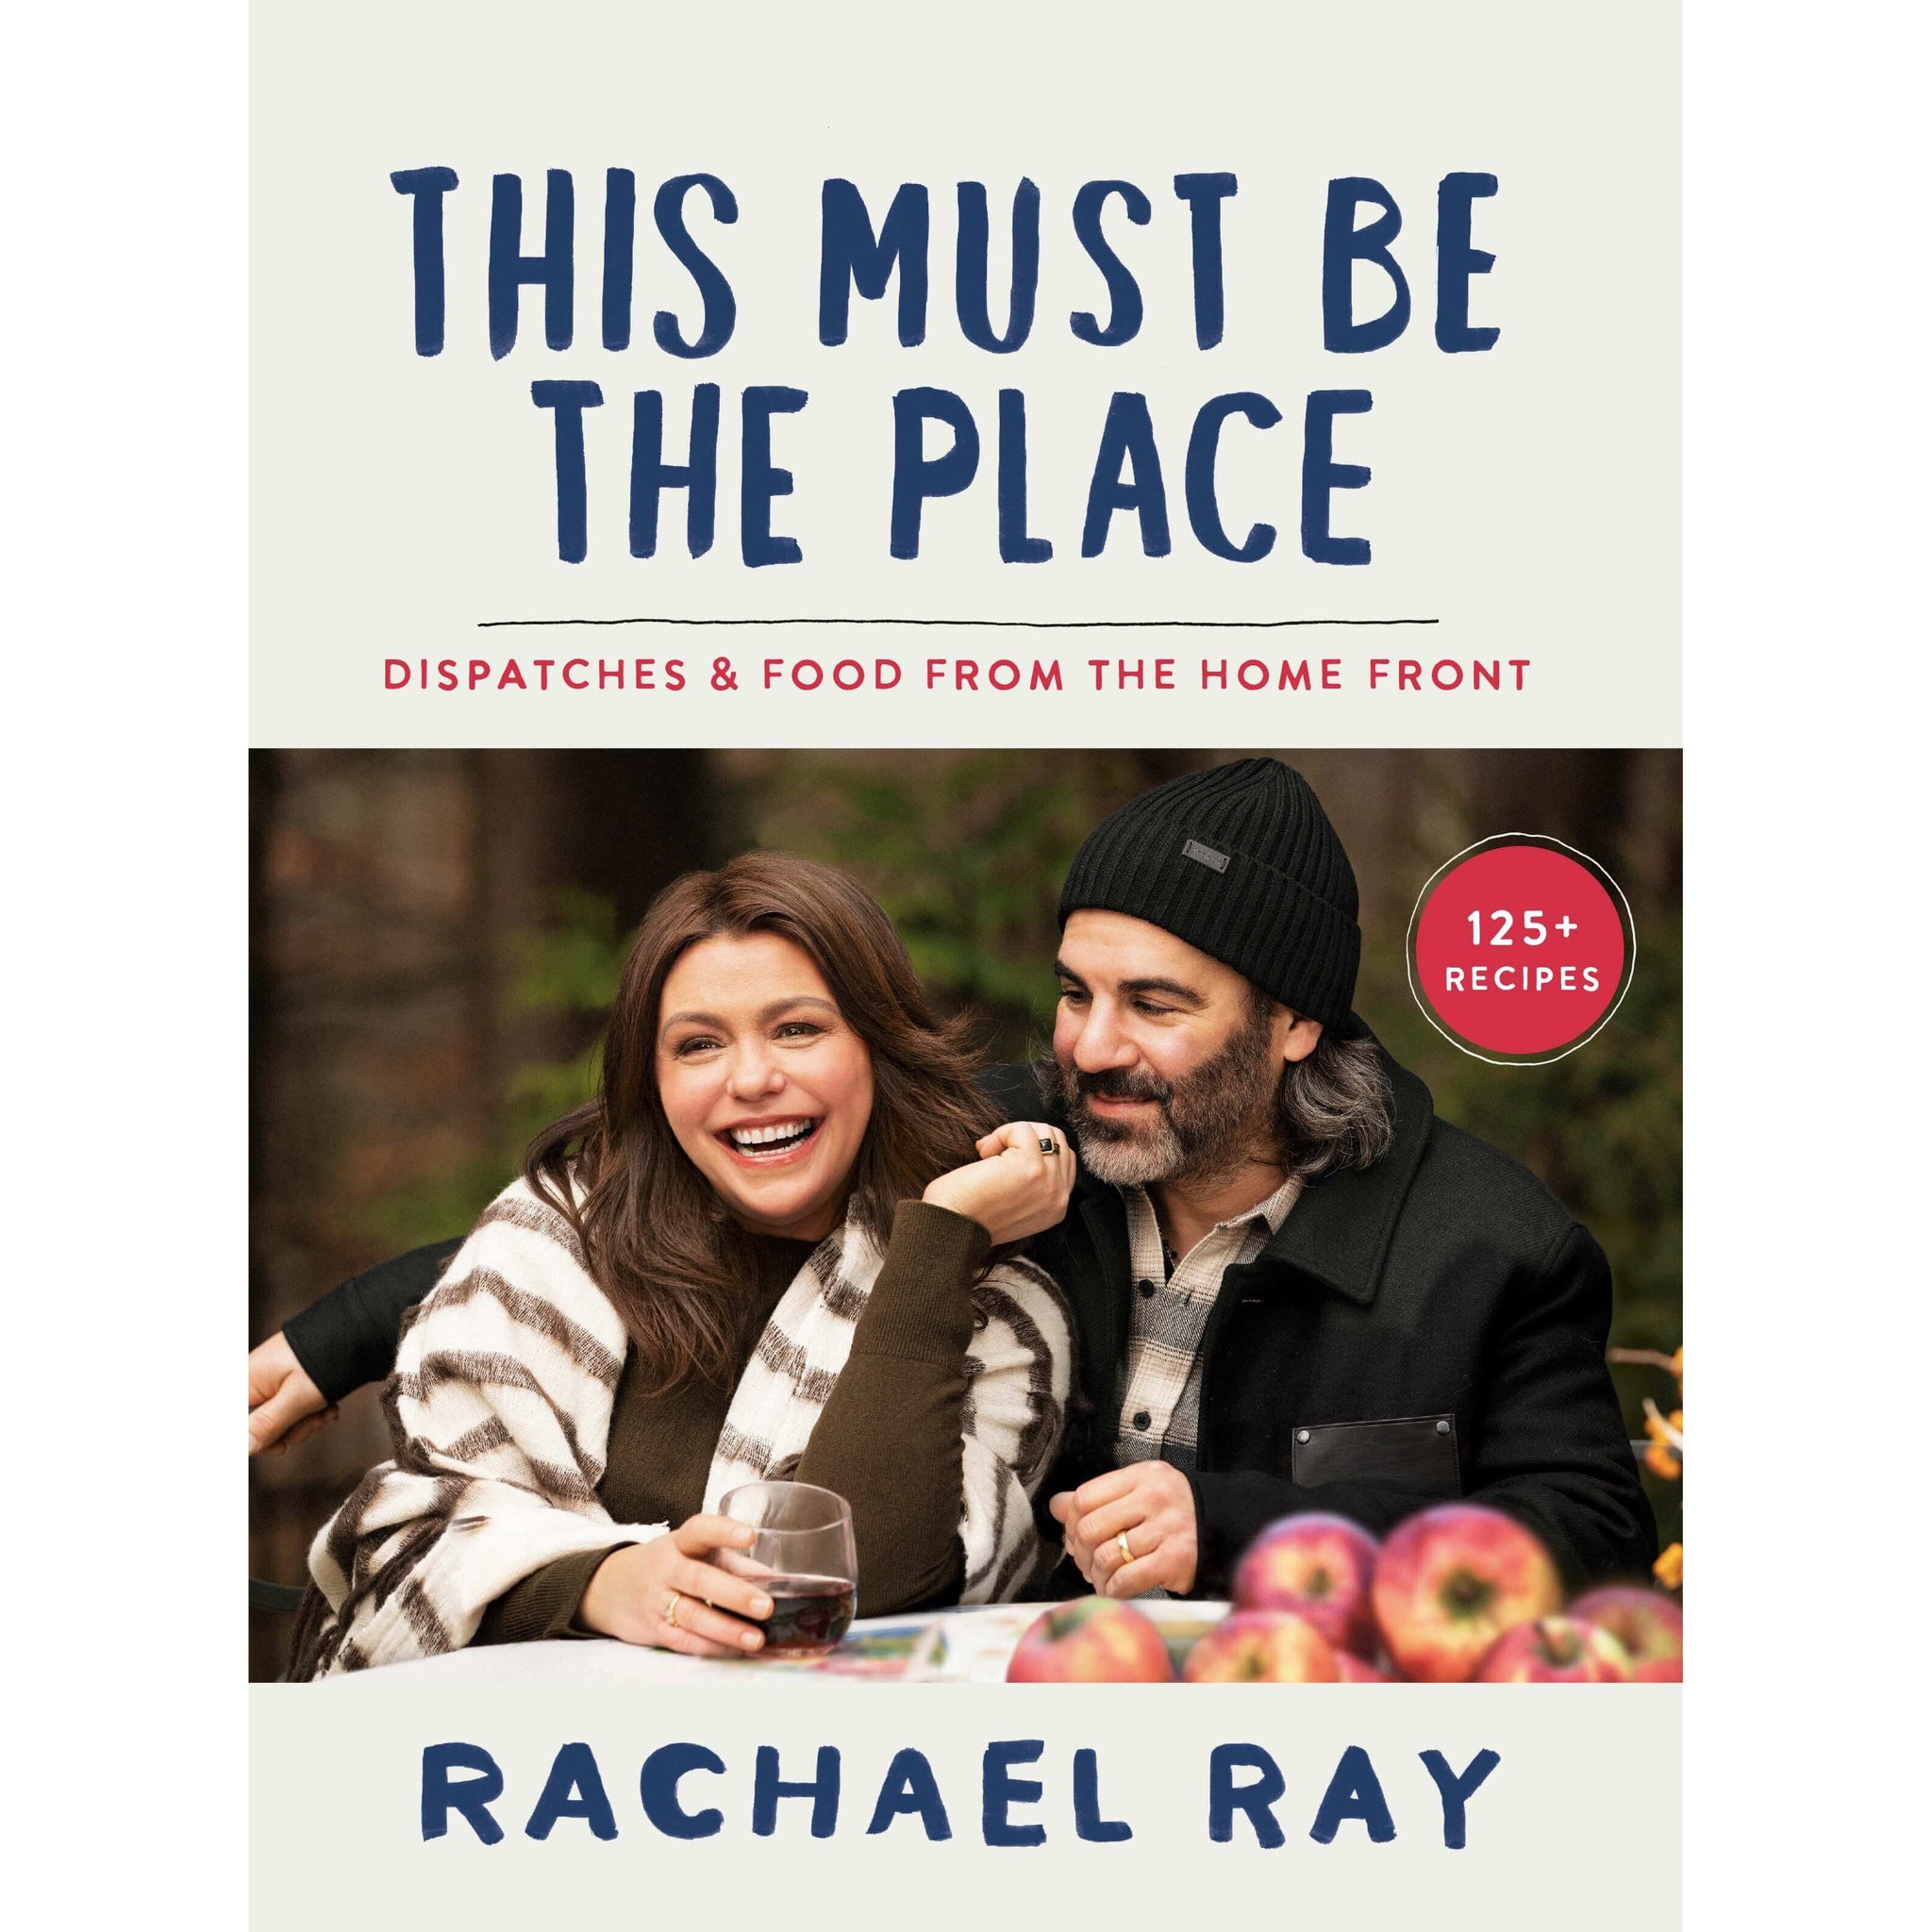 Rachael Ray: This Must Be the Place